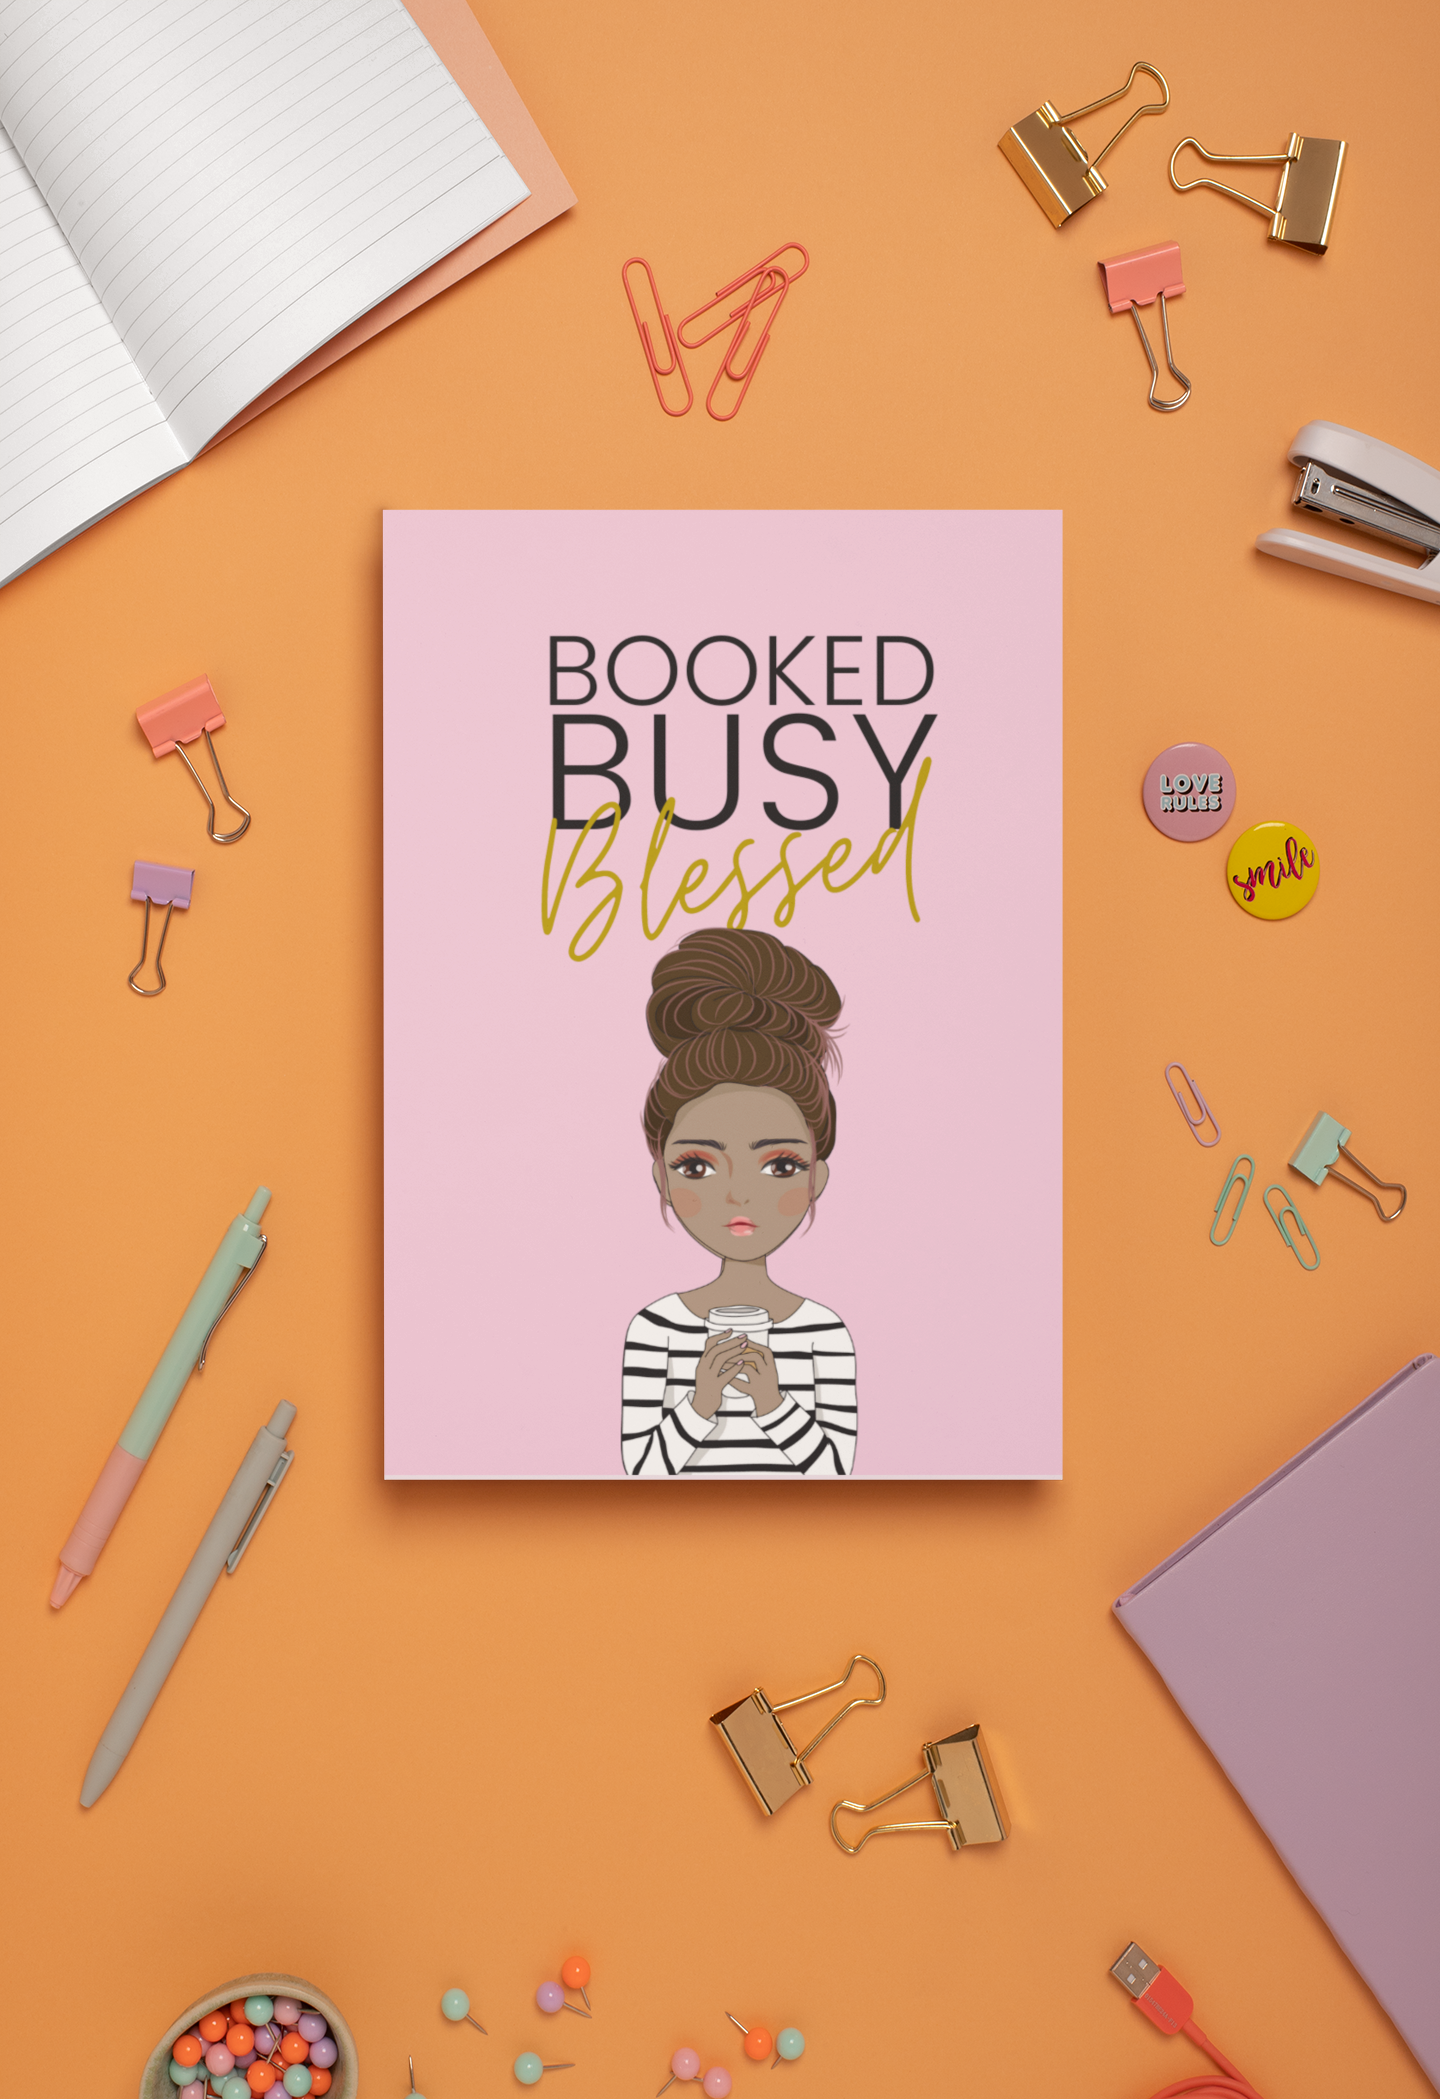 Booked Busy Blessed Bun Girl Lined Journal